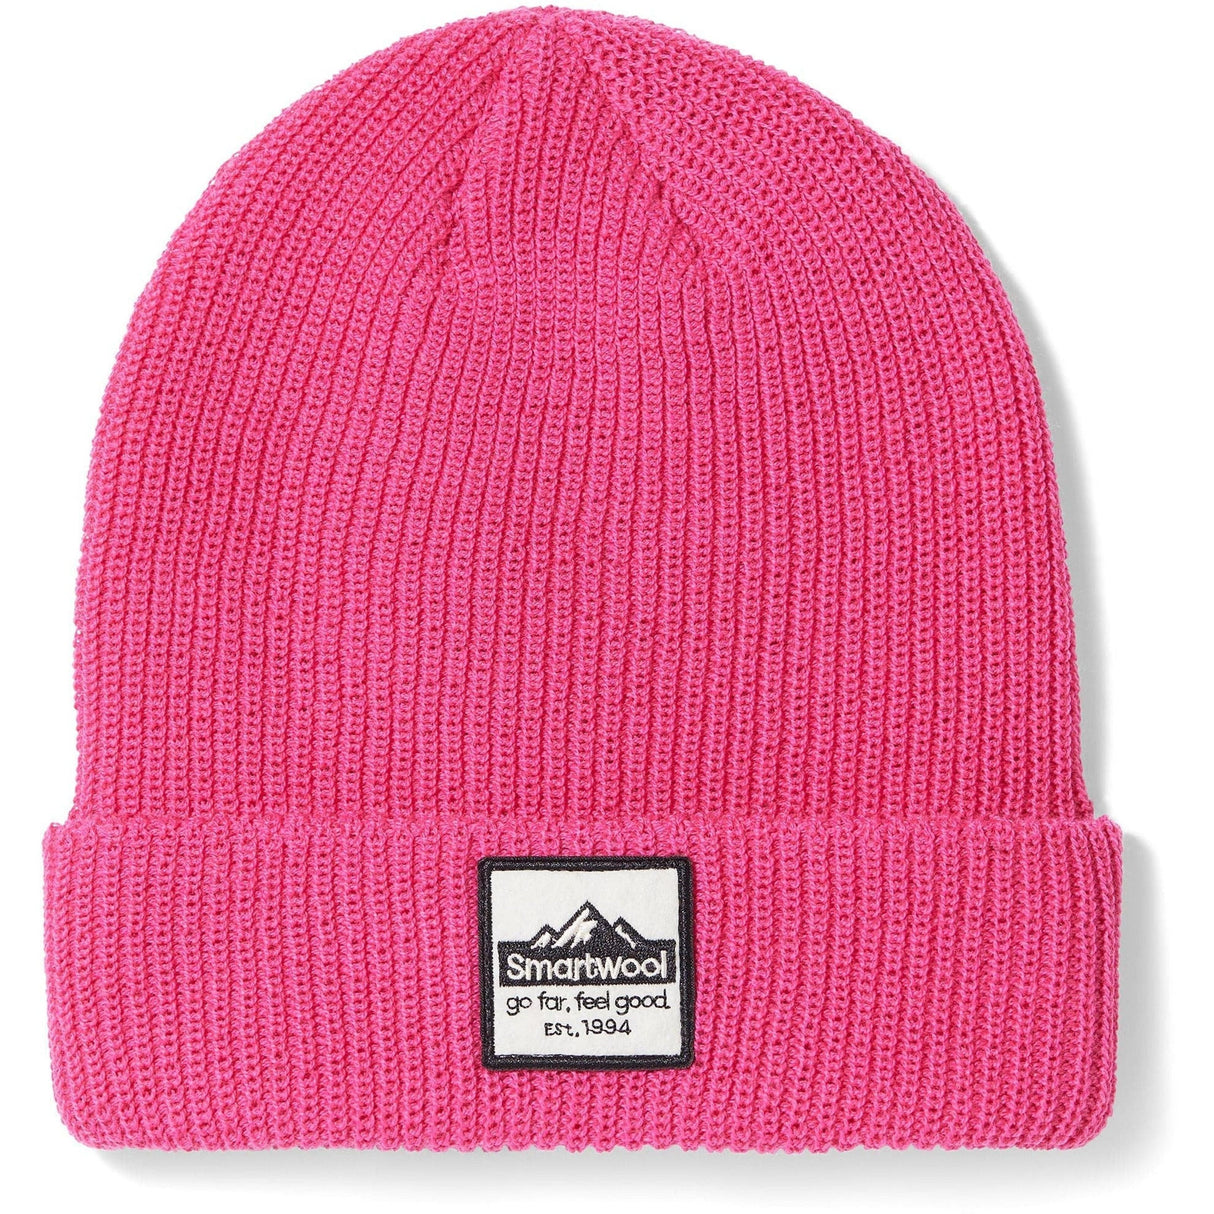 Smartwool Patch Beanie  -  One Size Fits Most / Power Pink